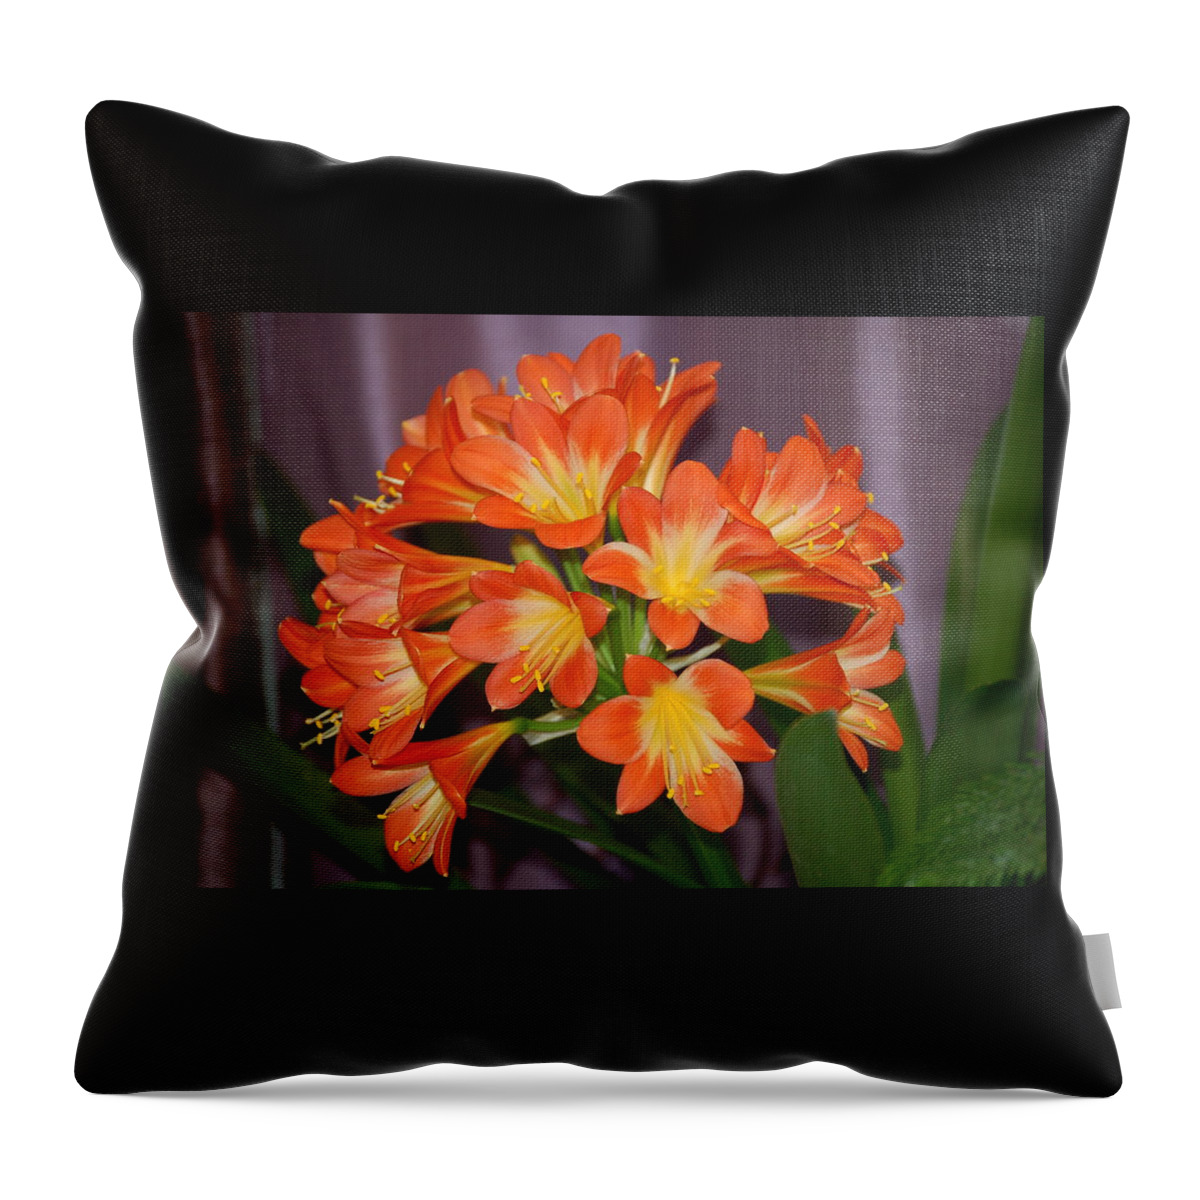 Flowers Throw Pillow featuring the photograph Clivia Blossoms by Nancy Ayanna Wyatt